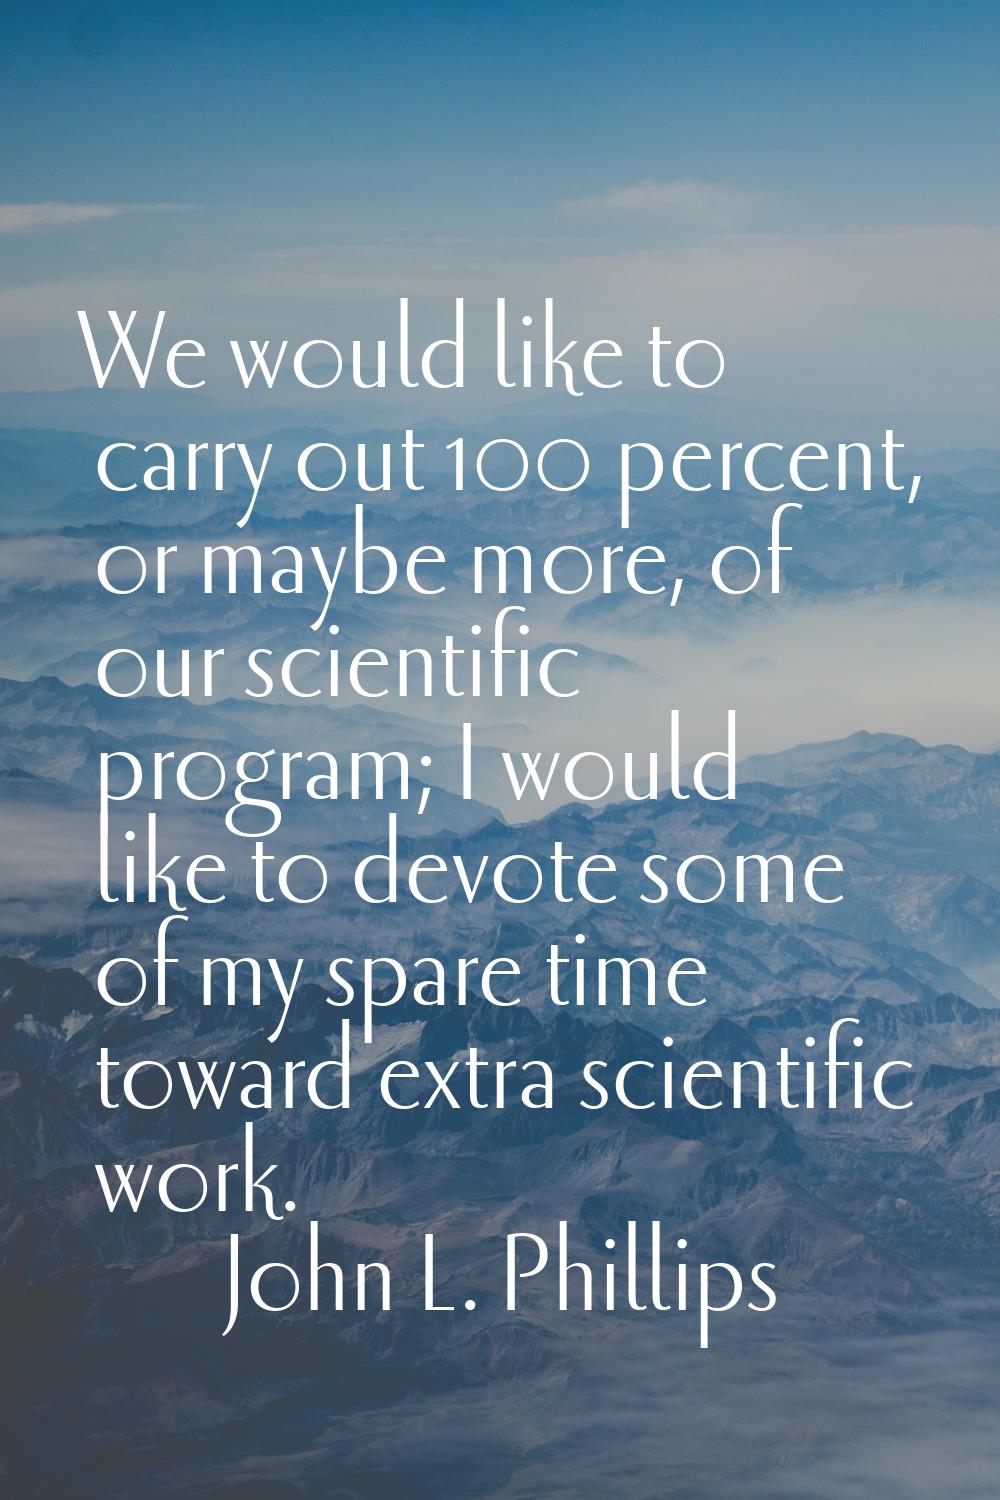 We would like to carry out 100 percent, or maybe more, of our scientific program; I would like to d